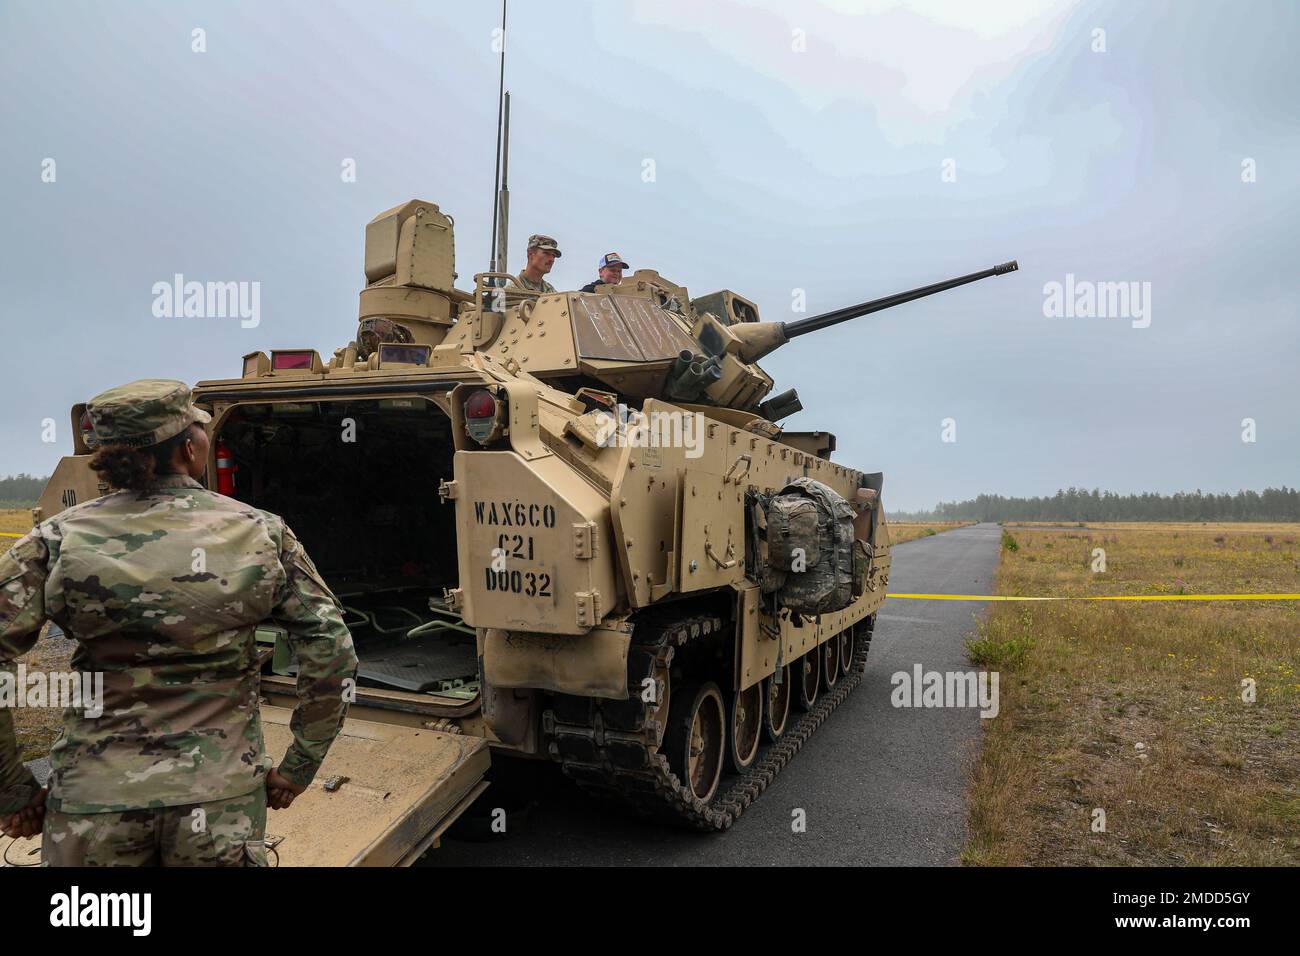 U.S. Soldiers assigned to the 4th Squadron, 10th Cavalry Regiment, 3rd Armored Brigade Combat Team, 4th Infantry Division, stage a U.S. Army M2 Bradley Fighting Vehicle for a static display during the Oripää Airshow at Säkylä, Finland, July 16, 2022. The 3rd Armored Brigade Combat Team, 4th Infantry Division, and the Pori Brigade of the Finnish army began summer training in Finland to strengthen relations and help build interoperability between the two nations. Stock Photo